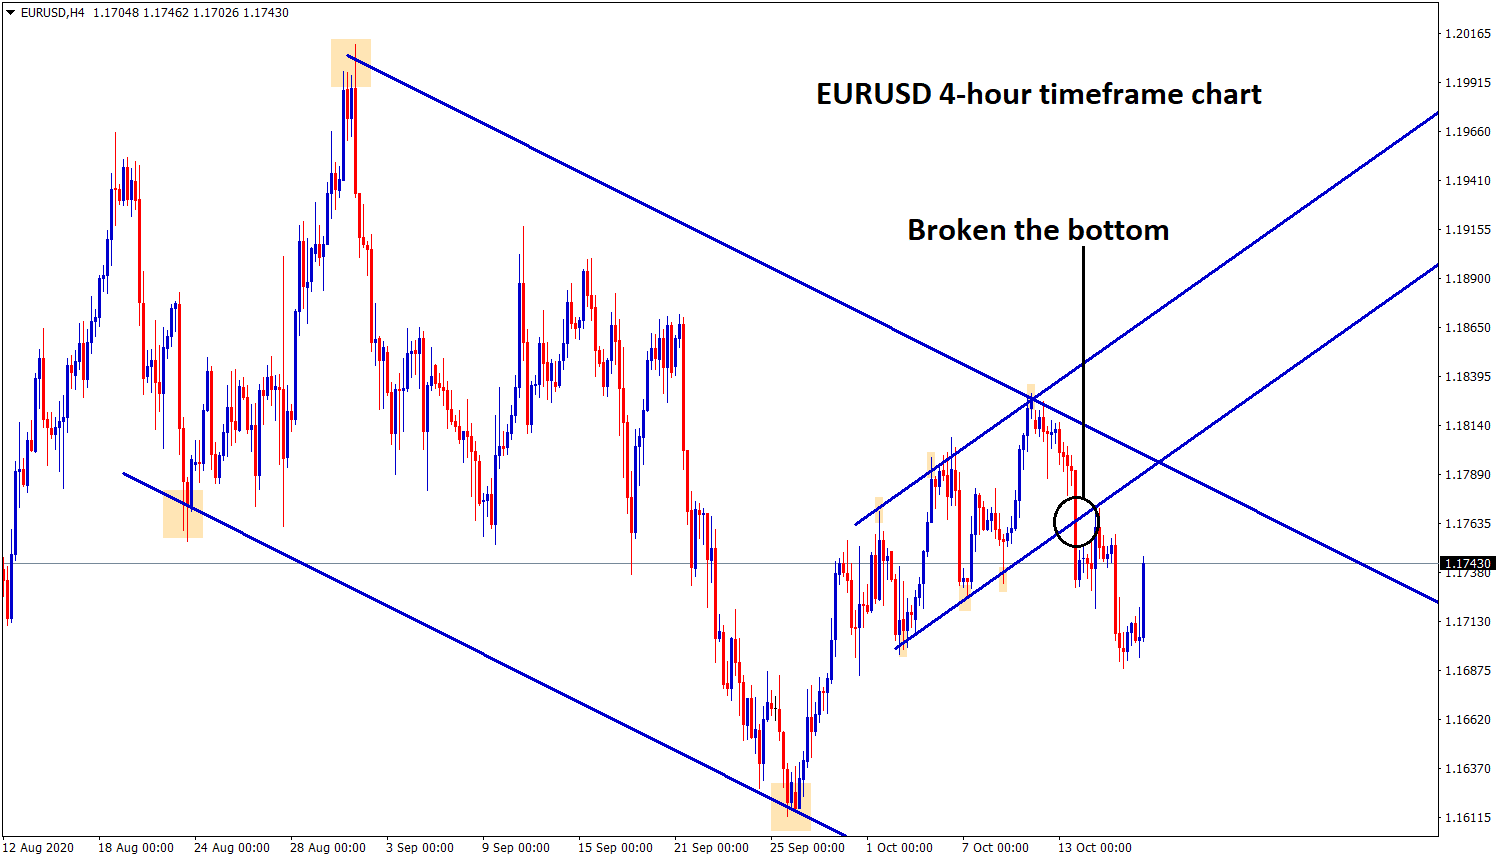 eurusd 4hr time frame down trend continuation